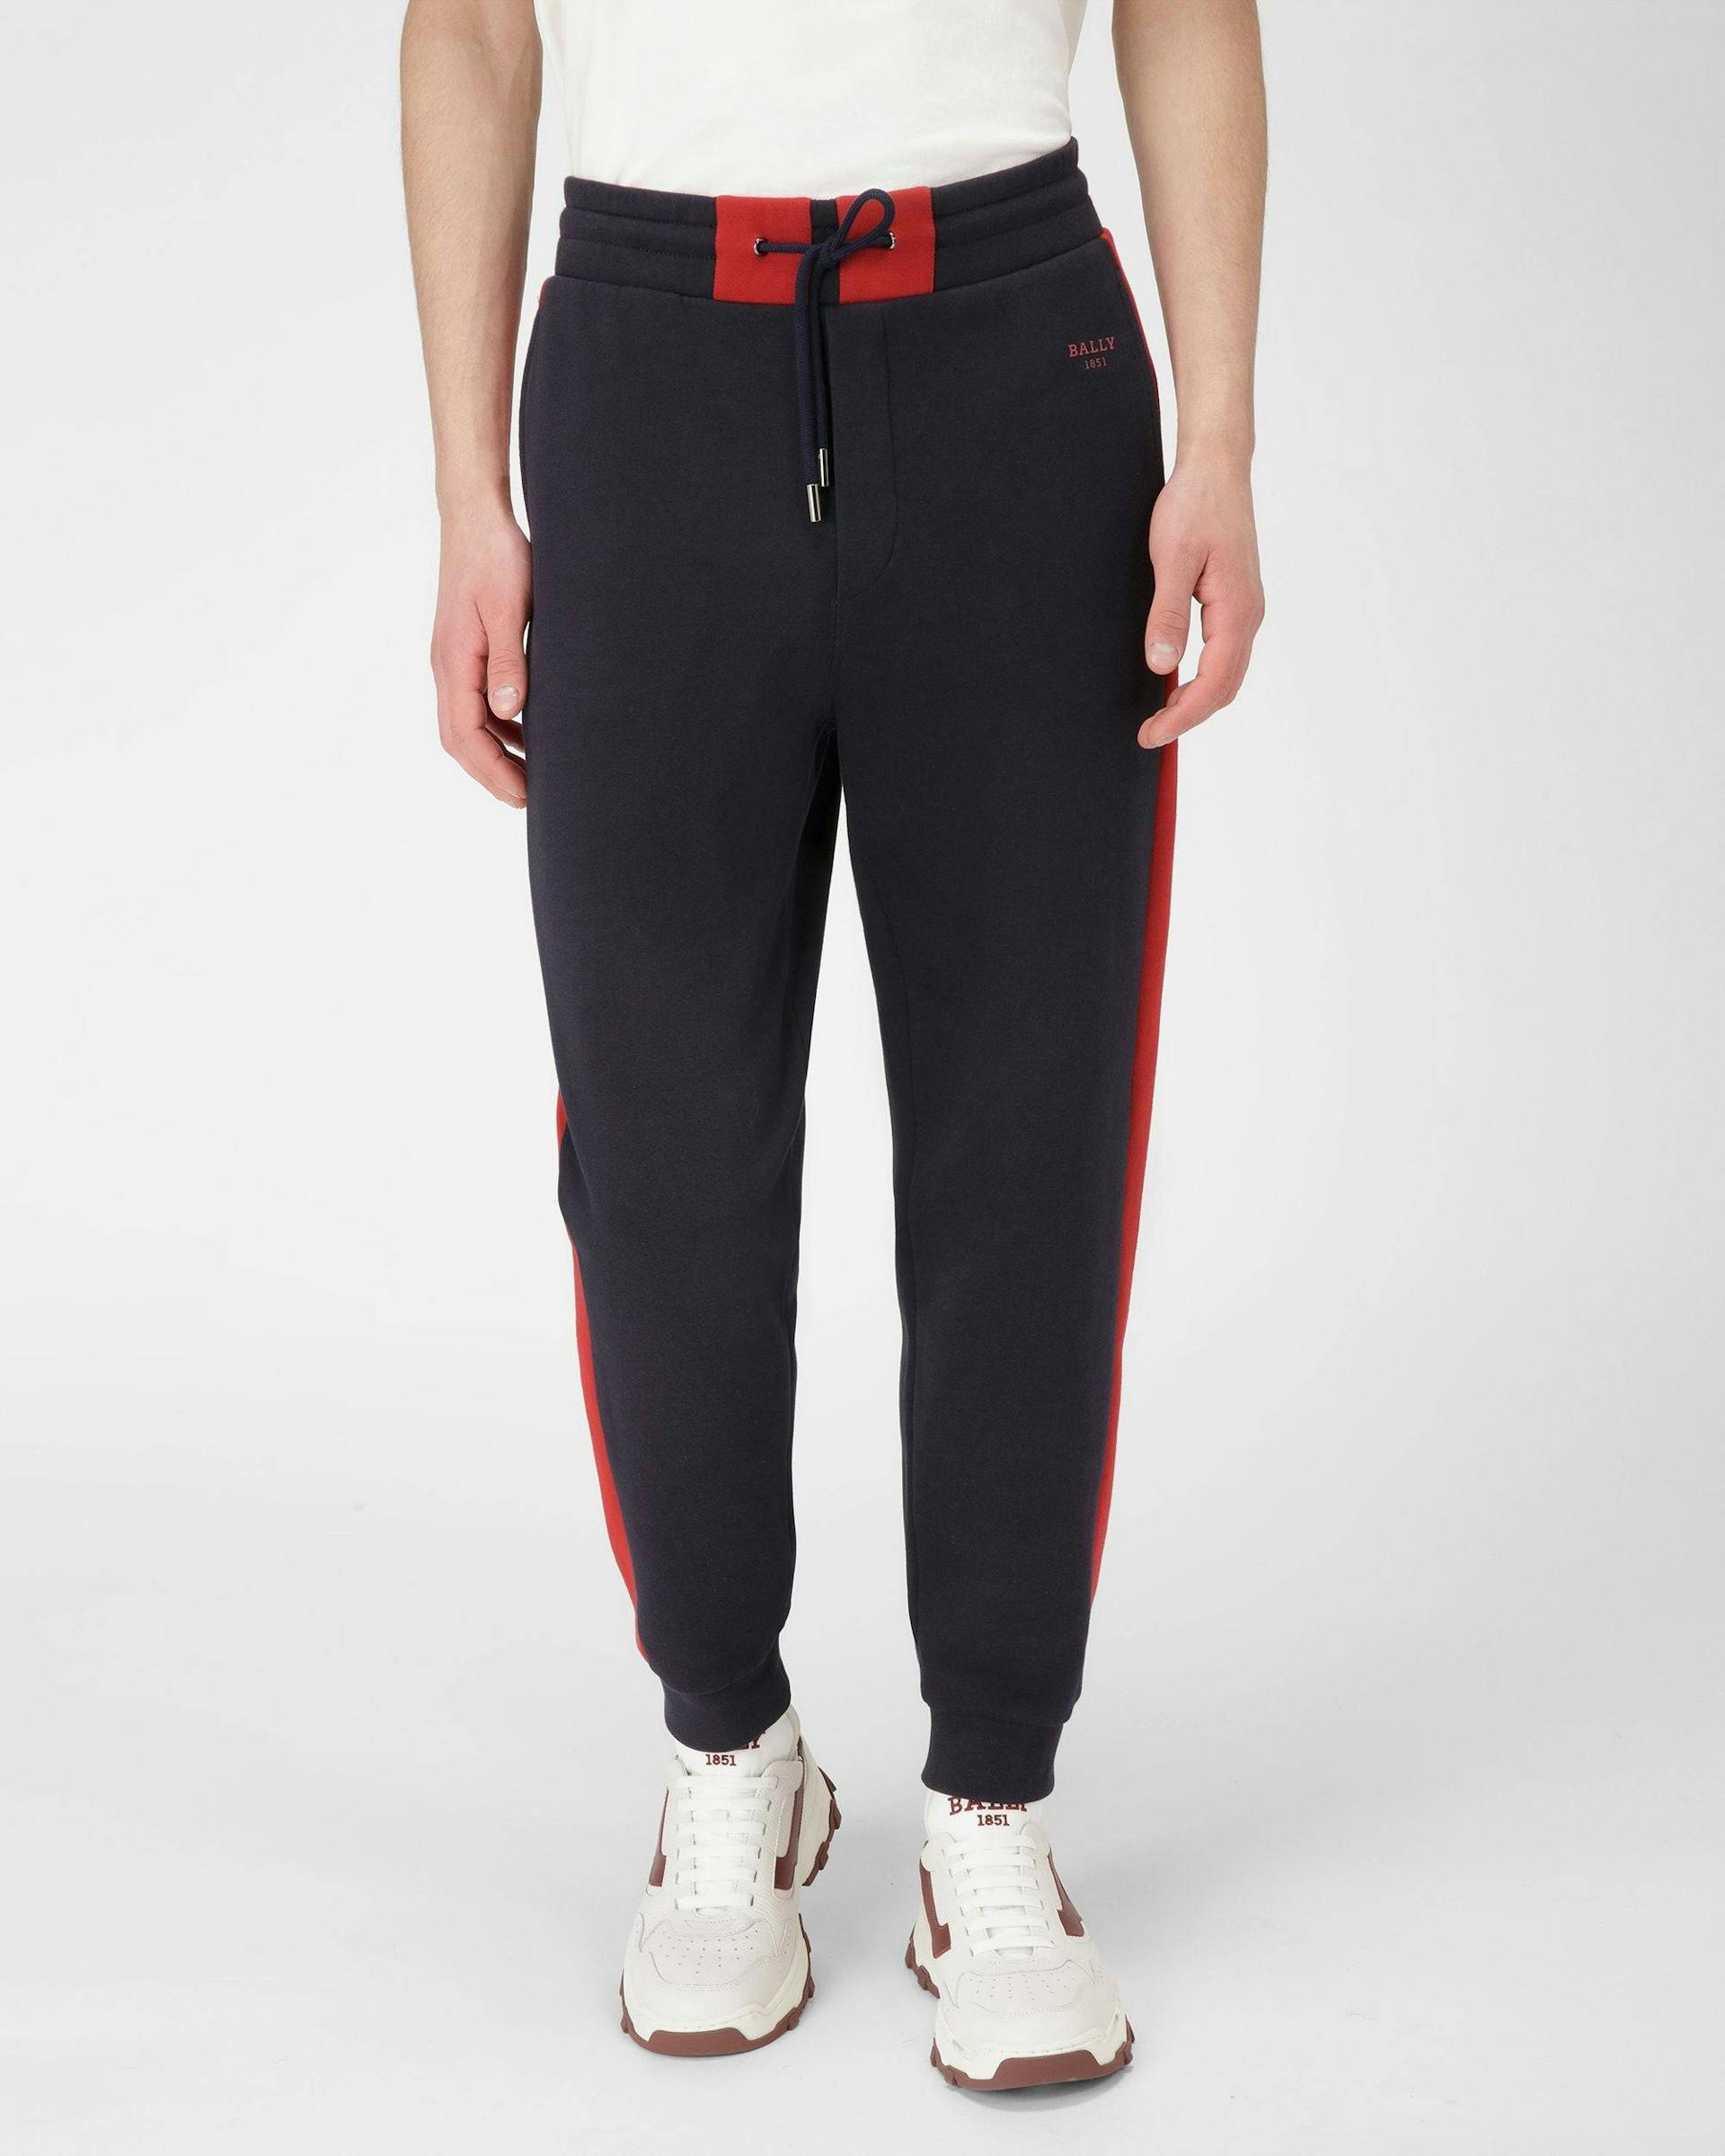 Contrast Stripe Cotton Sweatpants In Navy And Bally Red - Men's - Bally - 03